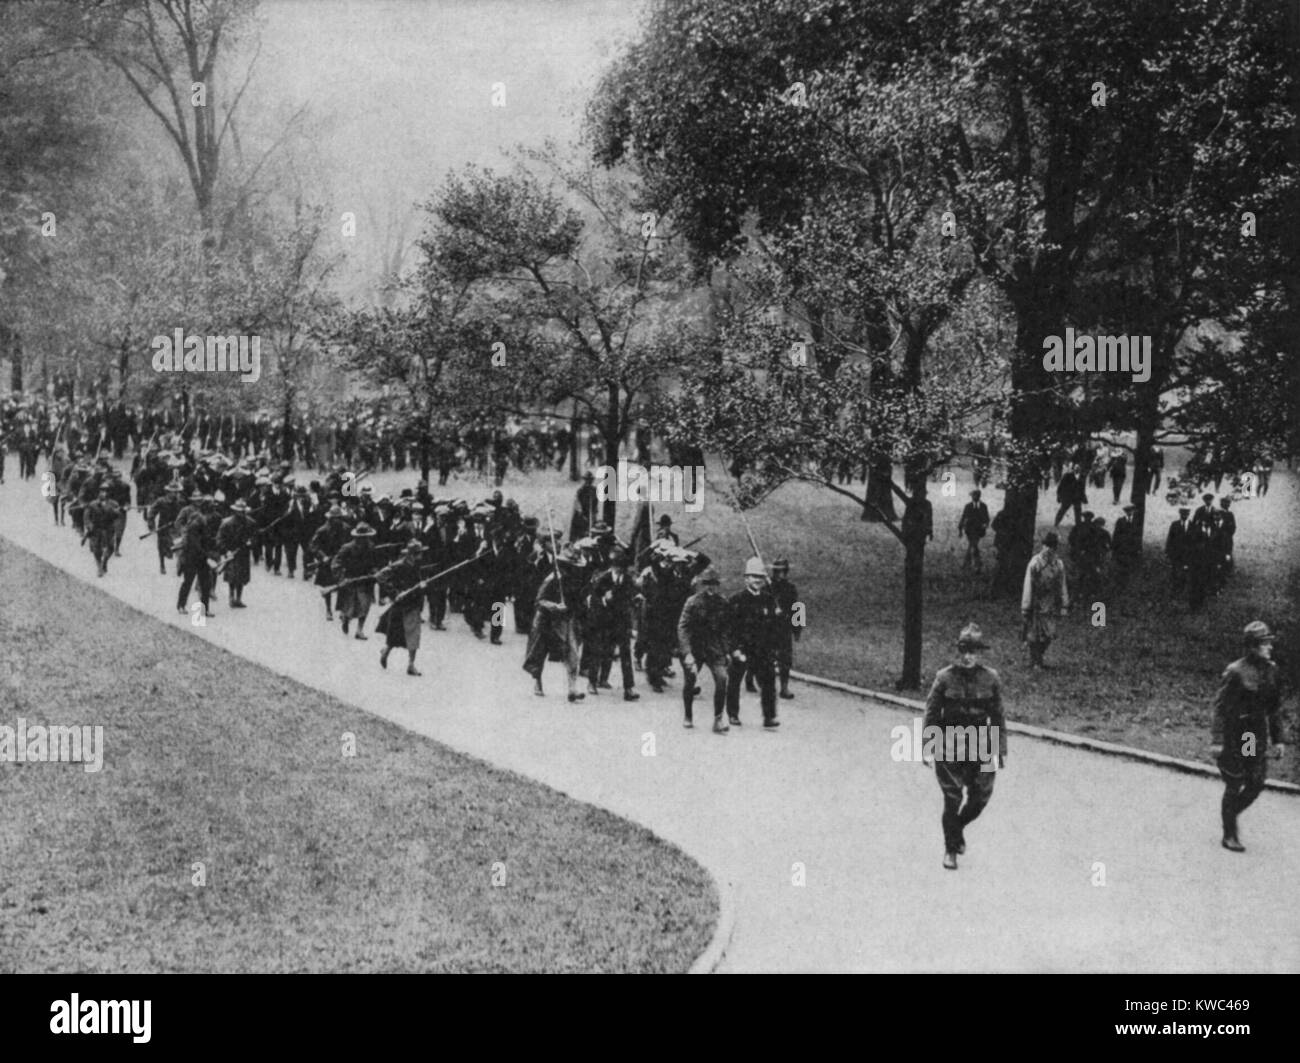 Massachusetts State Guard detaining suspects during the Boston Police Strike of Sept-Oct. 1919. Police Commissioner Curtis fired 1,117 strikers and replaced them from a pool of unemployed World War I veterans. (BSLOC 2015 15 101) Stock Photo